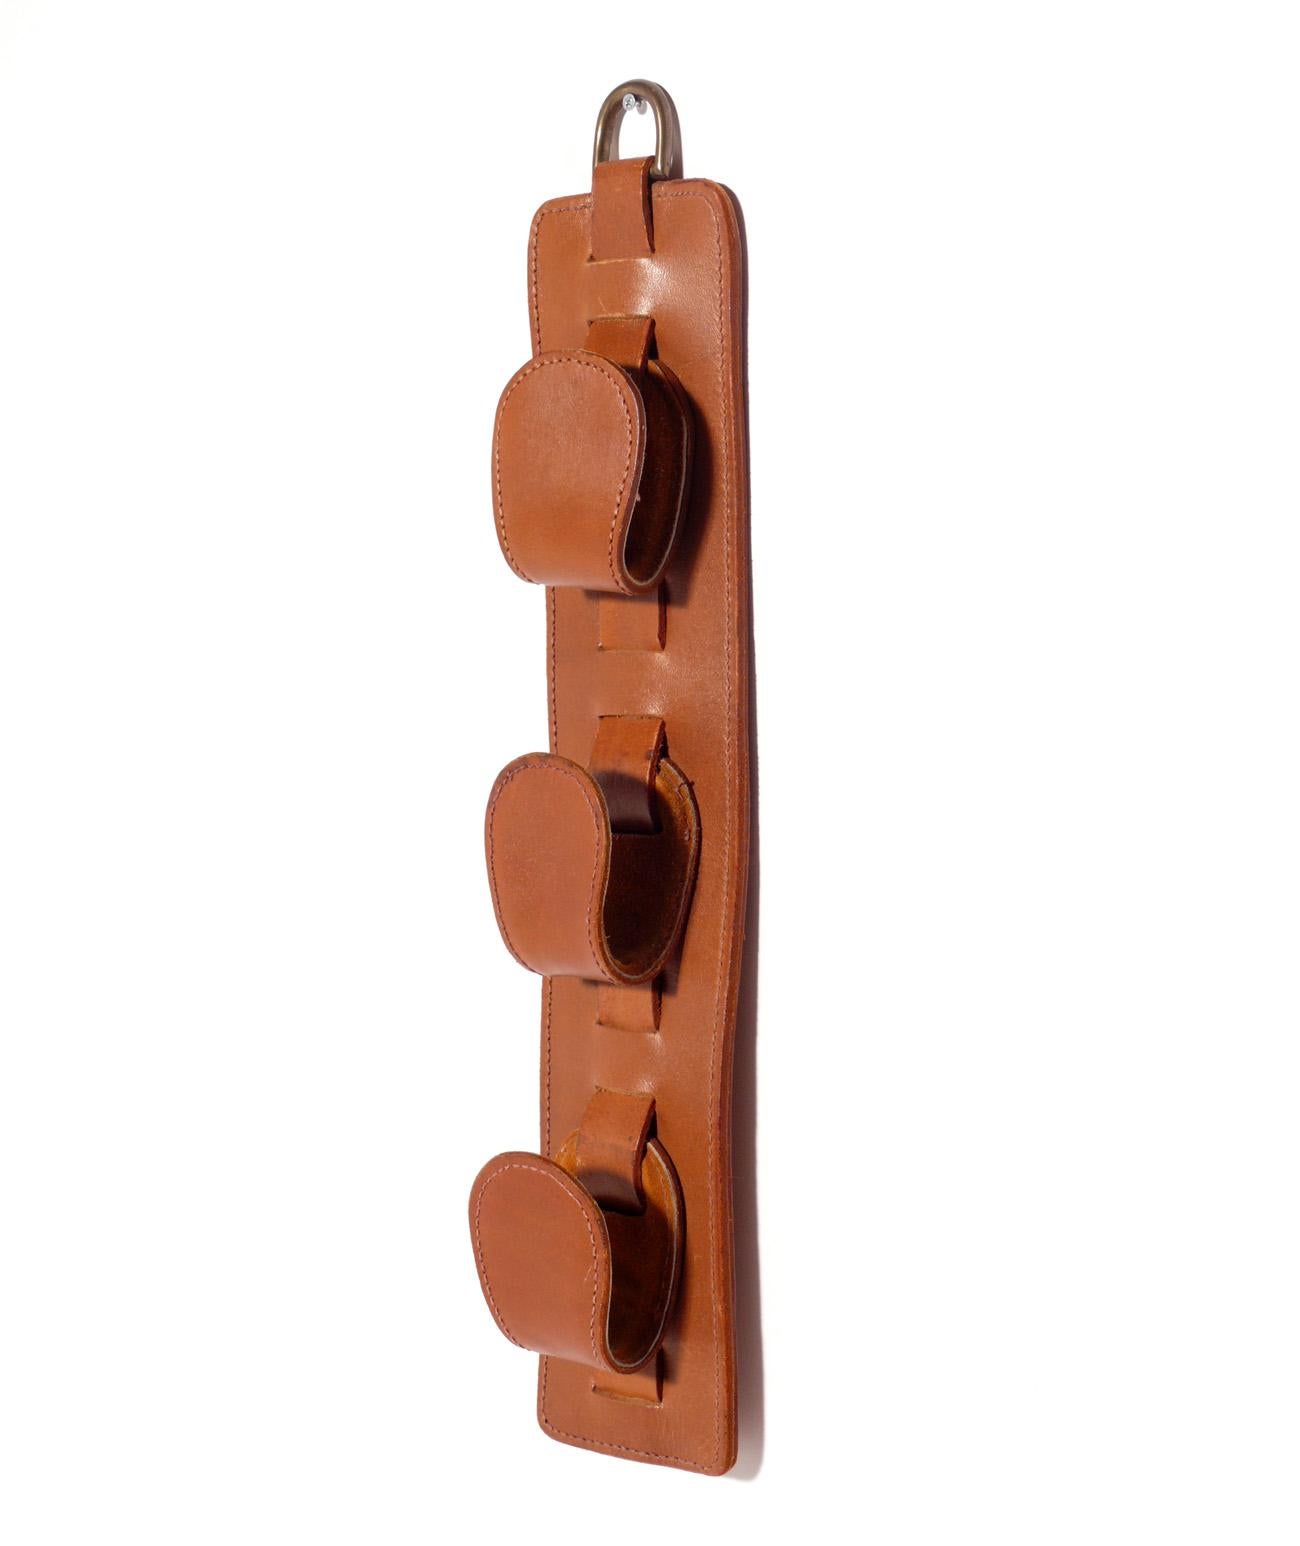 Stitched leather magazine holder attributed to Jacques Adnet, unsigned, France, circa 1960s. This piece is a versatile size and can be used to hold magazines or newspapers, or to hold other lightweight items such as dog leashes or as a coat hanger.